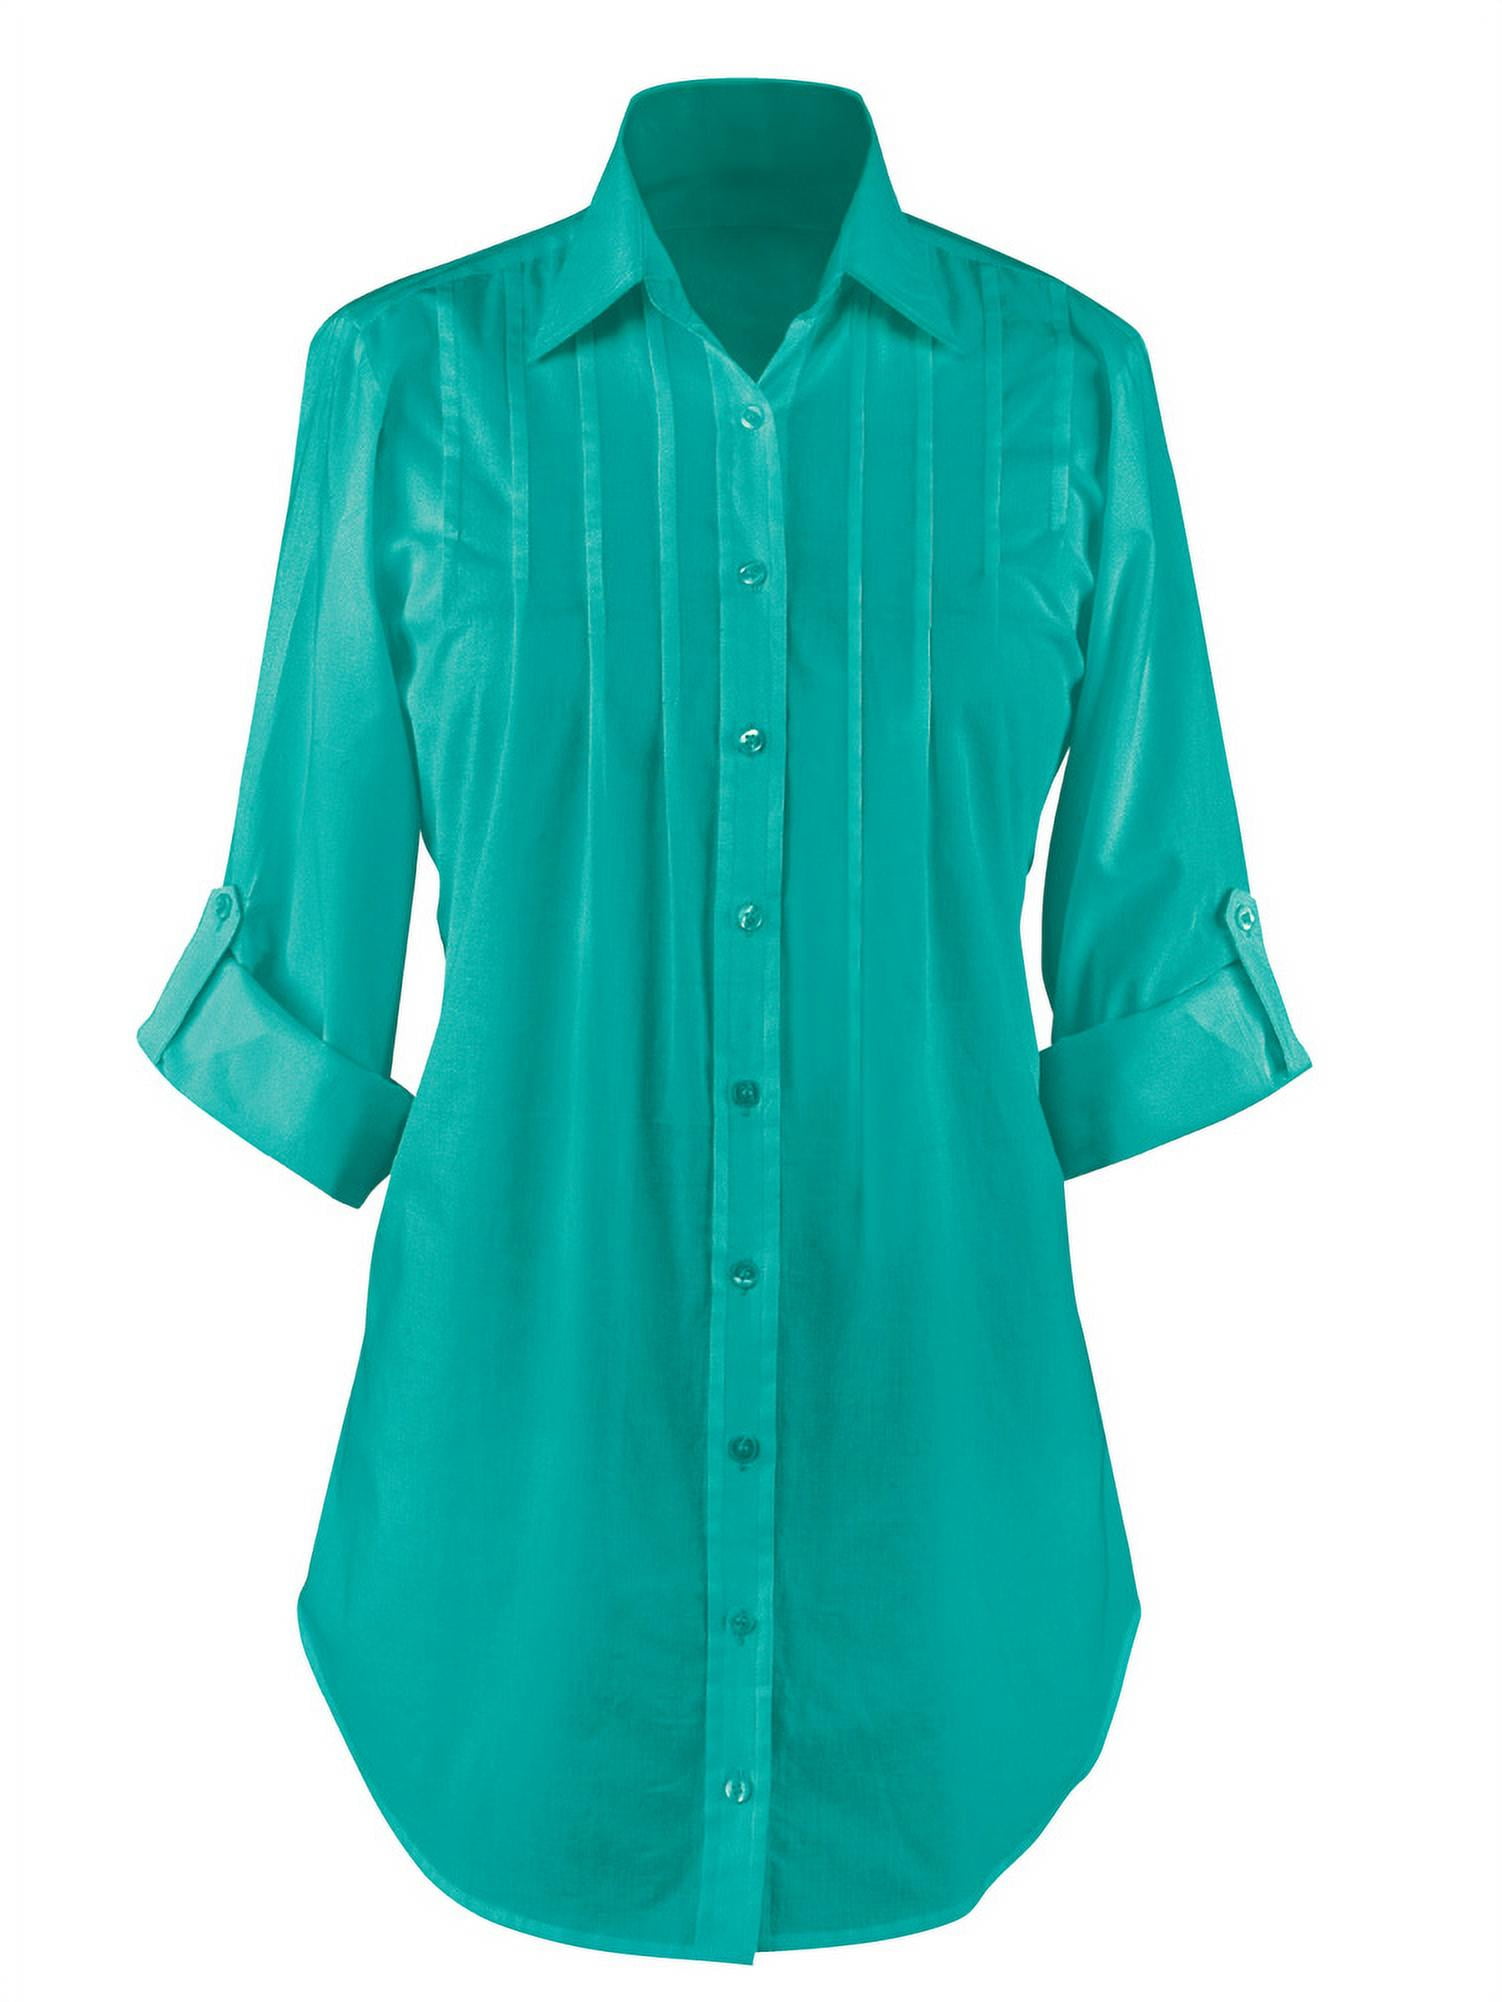 Women's Button Down, Collared, Roll Sleeve Tunic Top, Large 